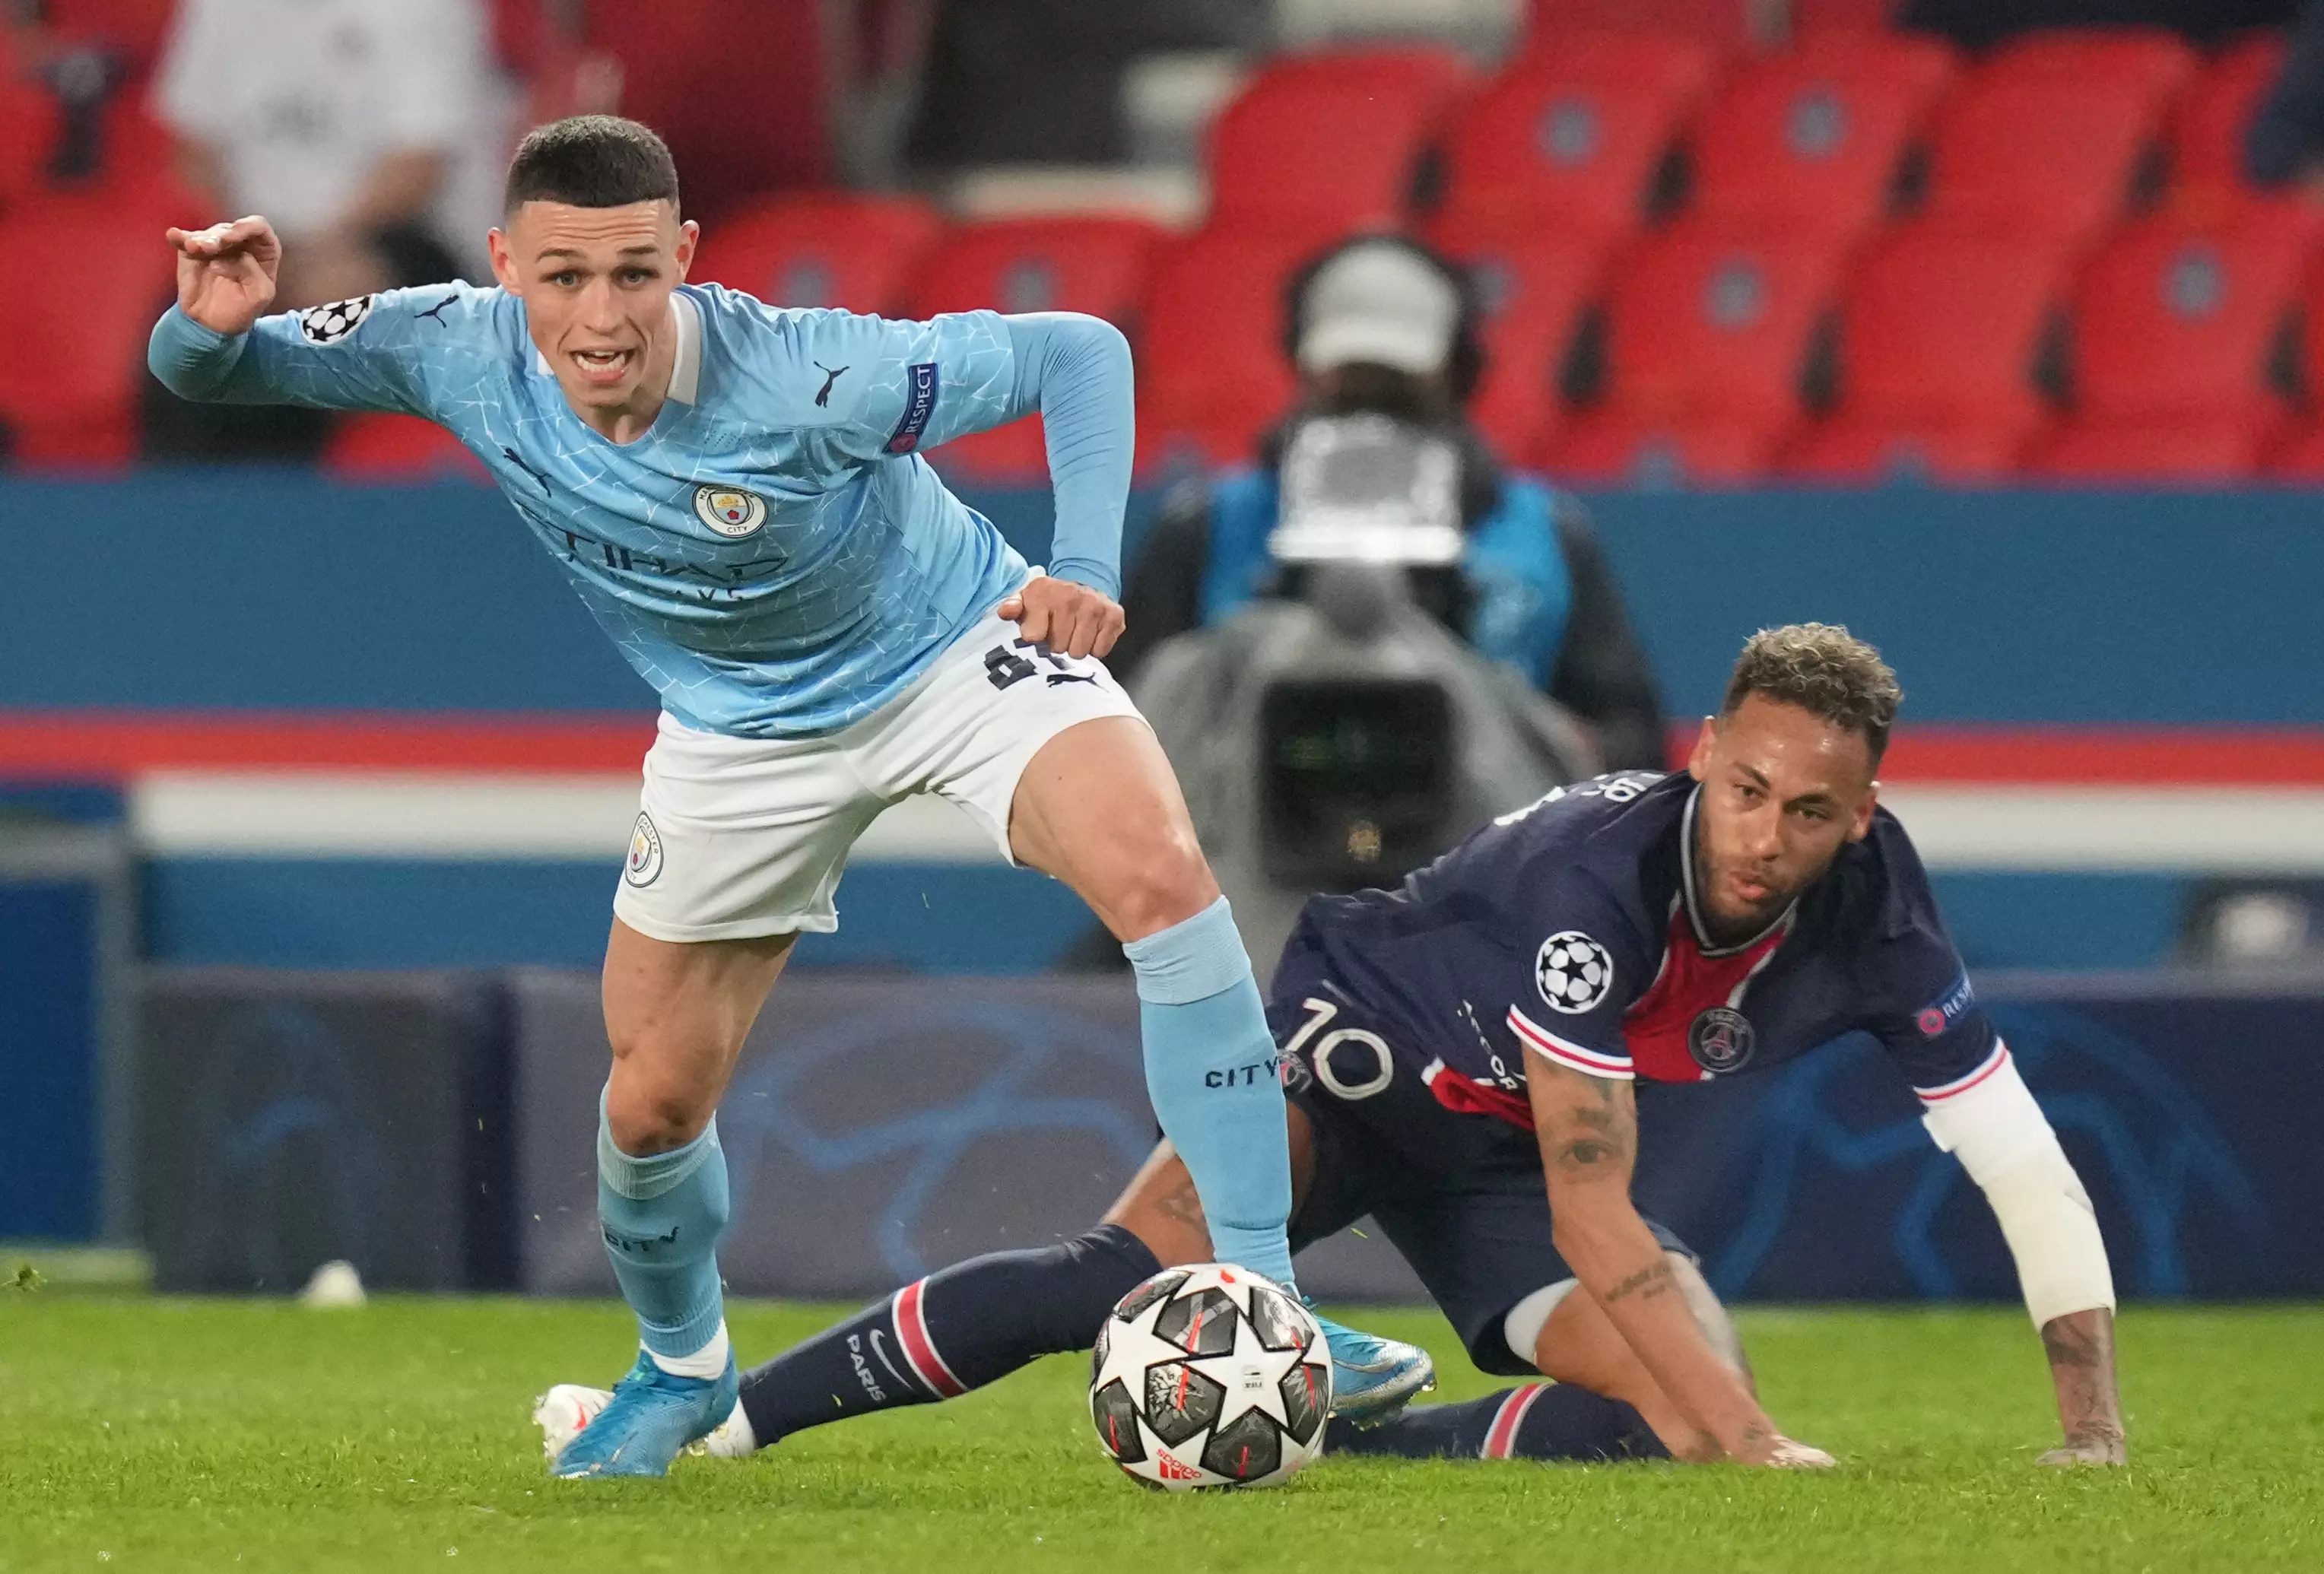 PSG have failed to win any of their previous games against City